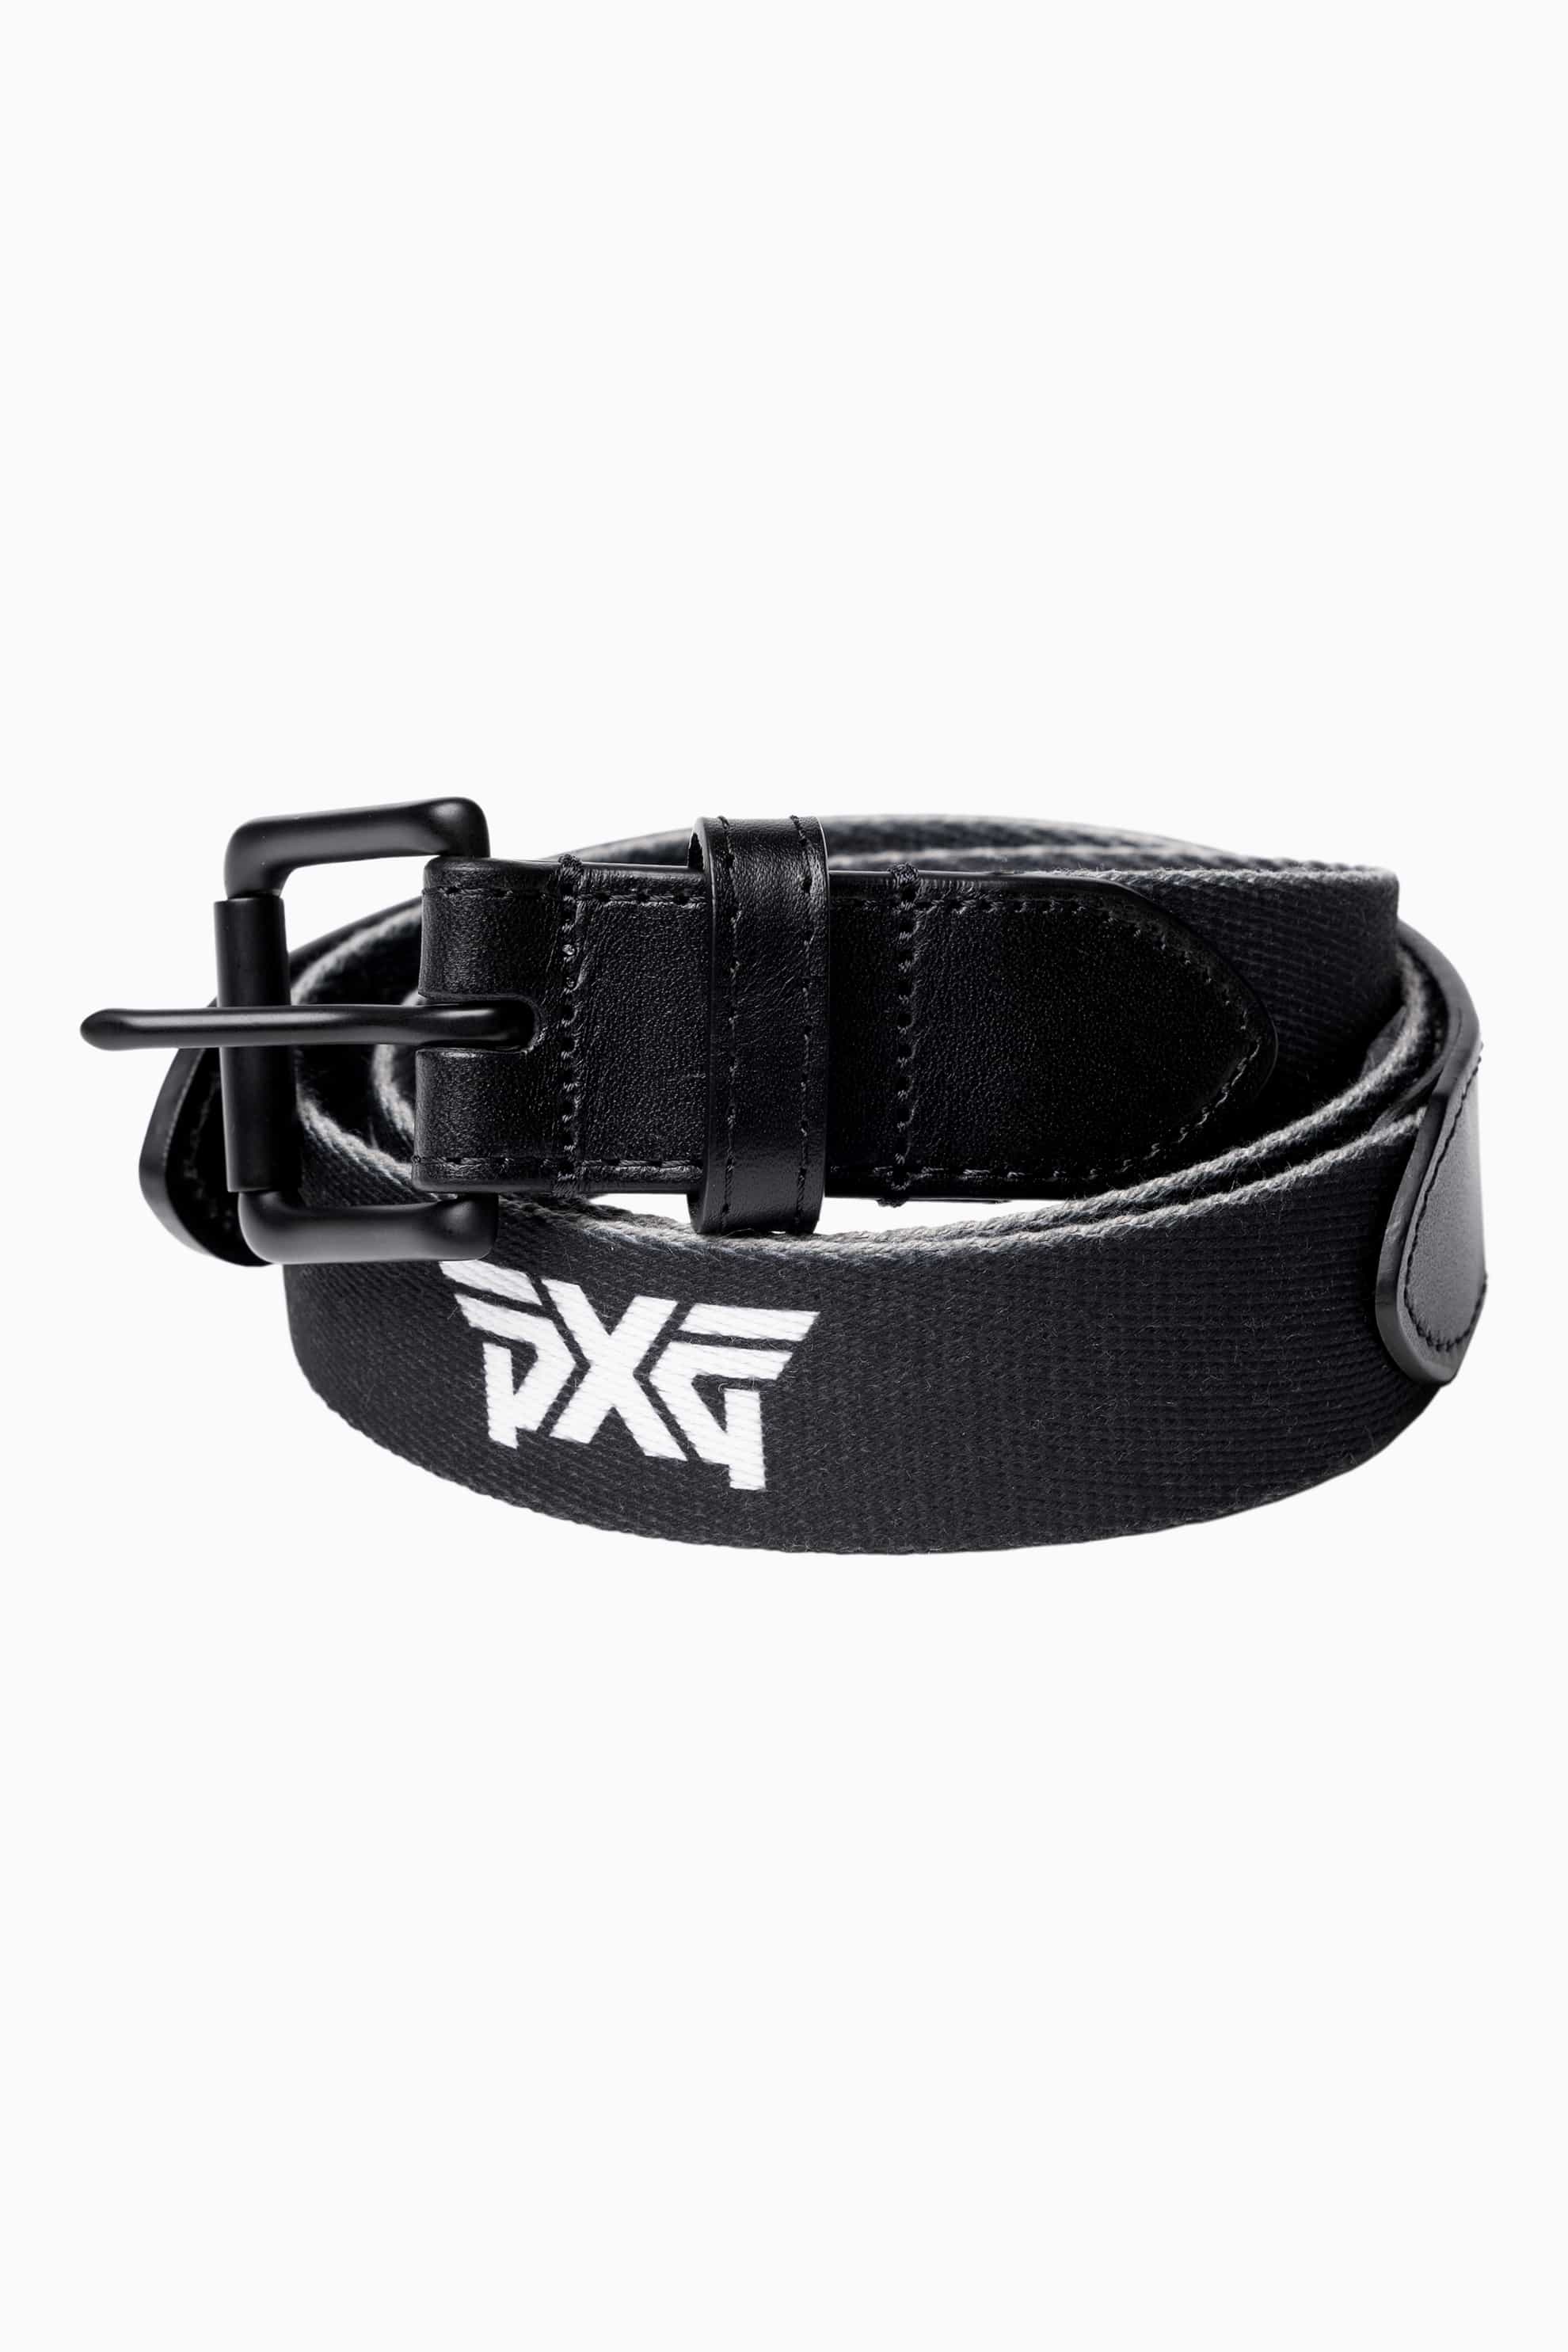 https://www.pxg.com/on/demandware.static/-/Sites-pxg-master/default/dw9ee652a2/images/hi-res/accessories/fashion%20accessories/belts/Black%20Solid%20PXG%20Belt/PXG-Belt-Black-Solid-Listing-1-HiRes-v2-50.jpg